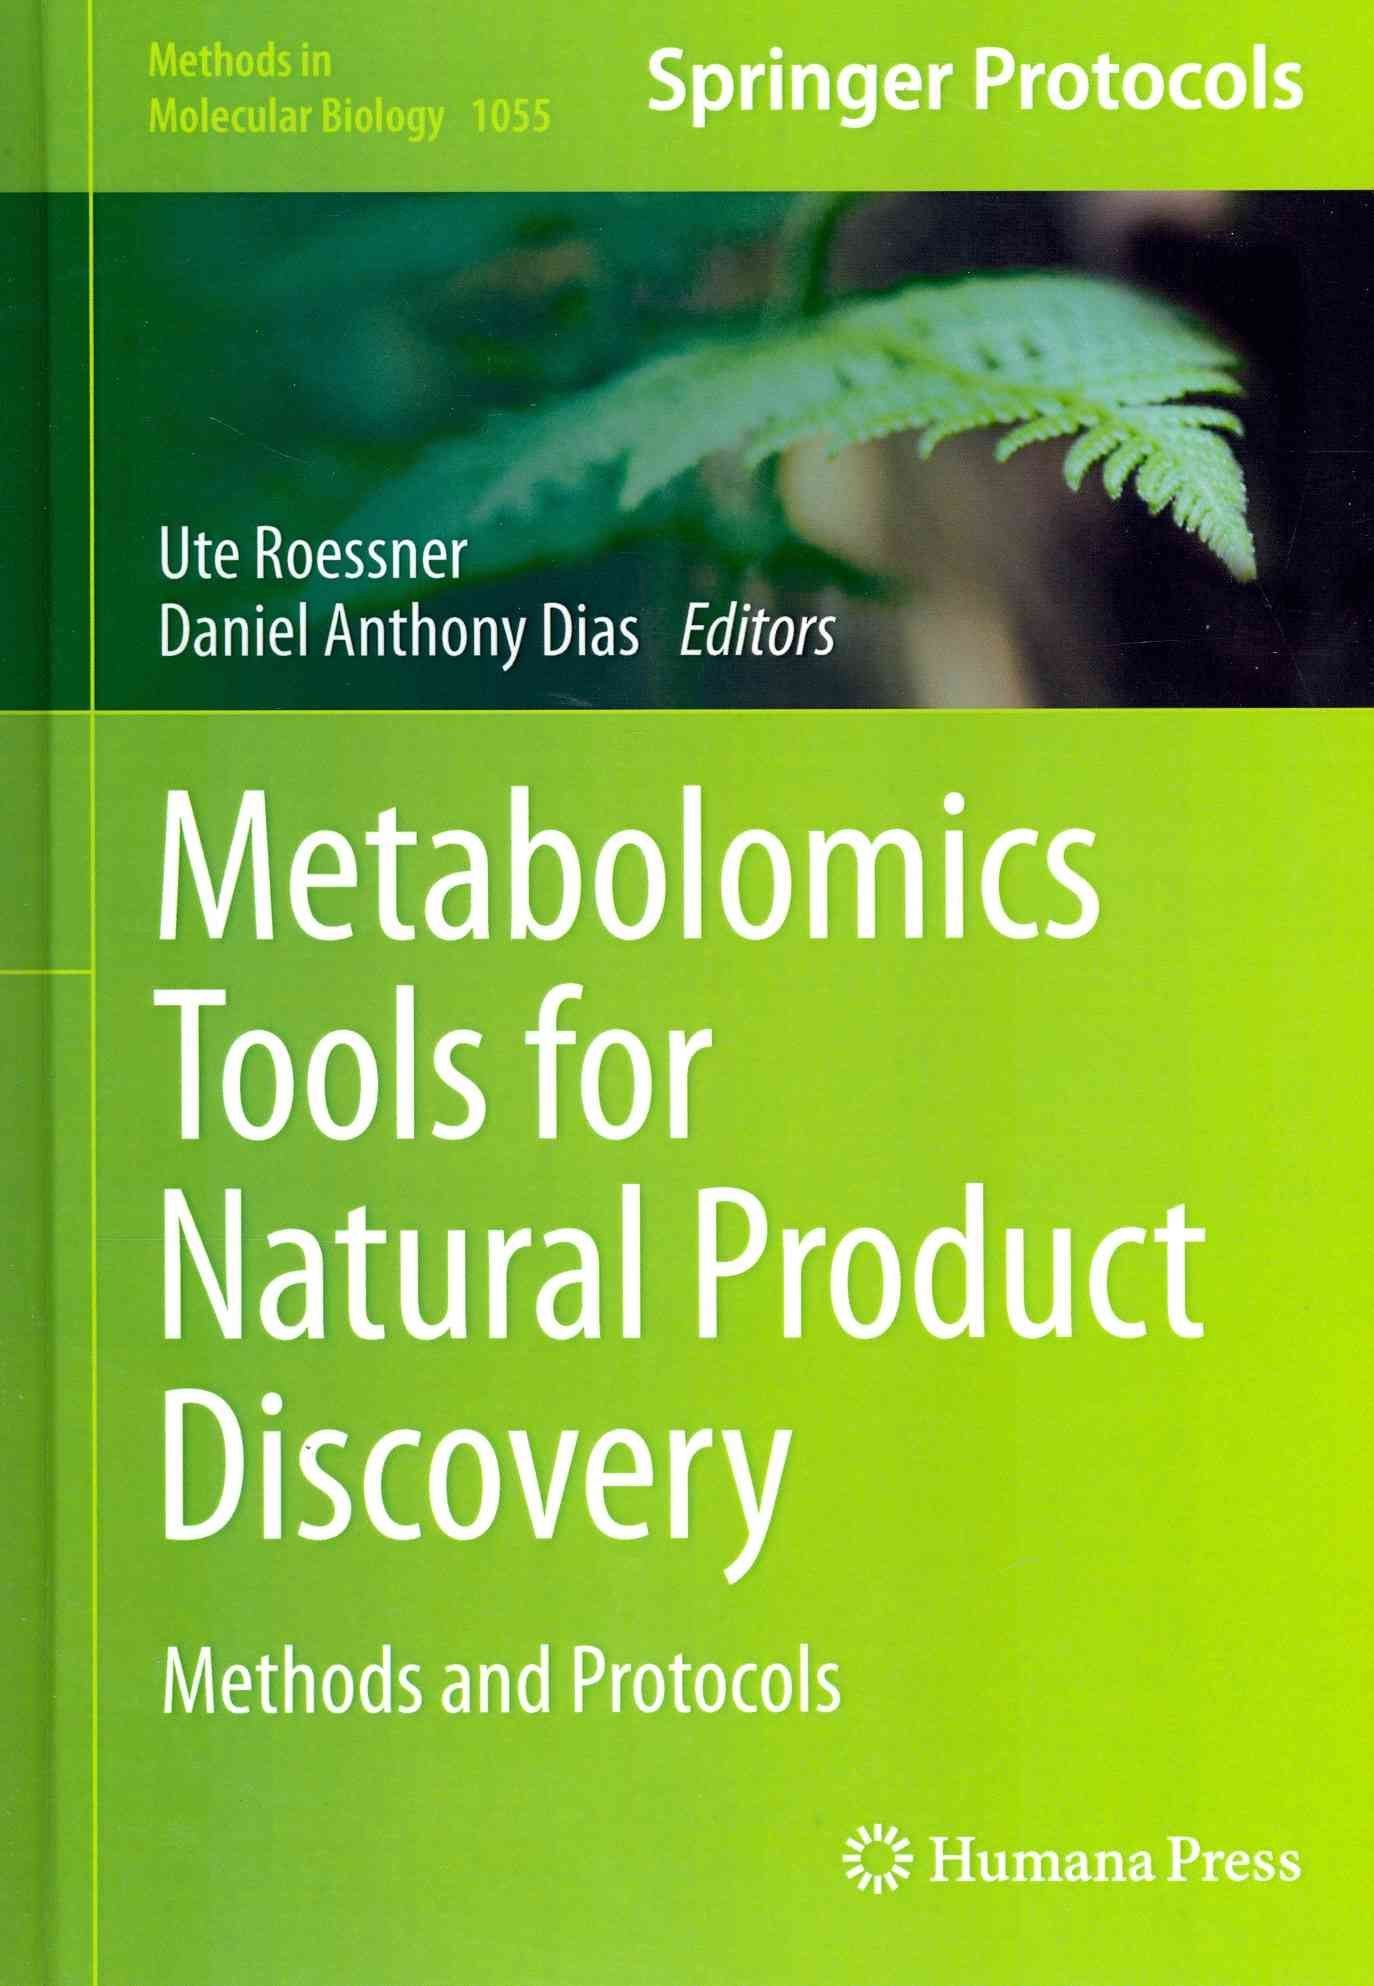 Metabolomics Tools for Natural Product Discovery